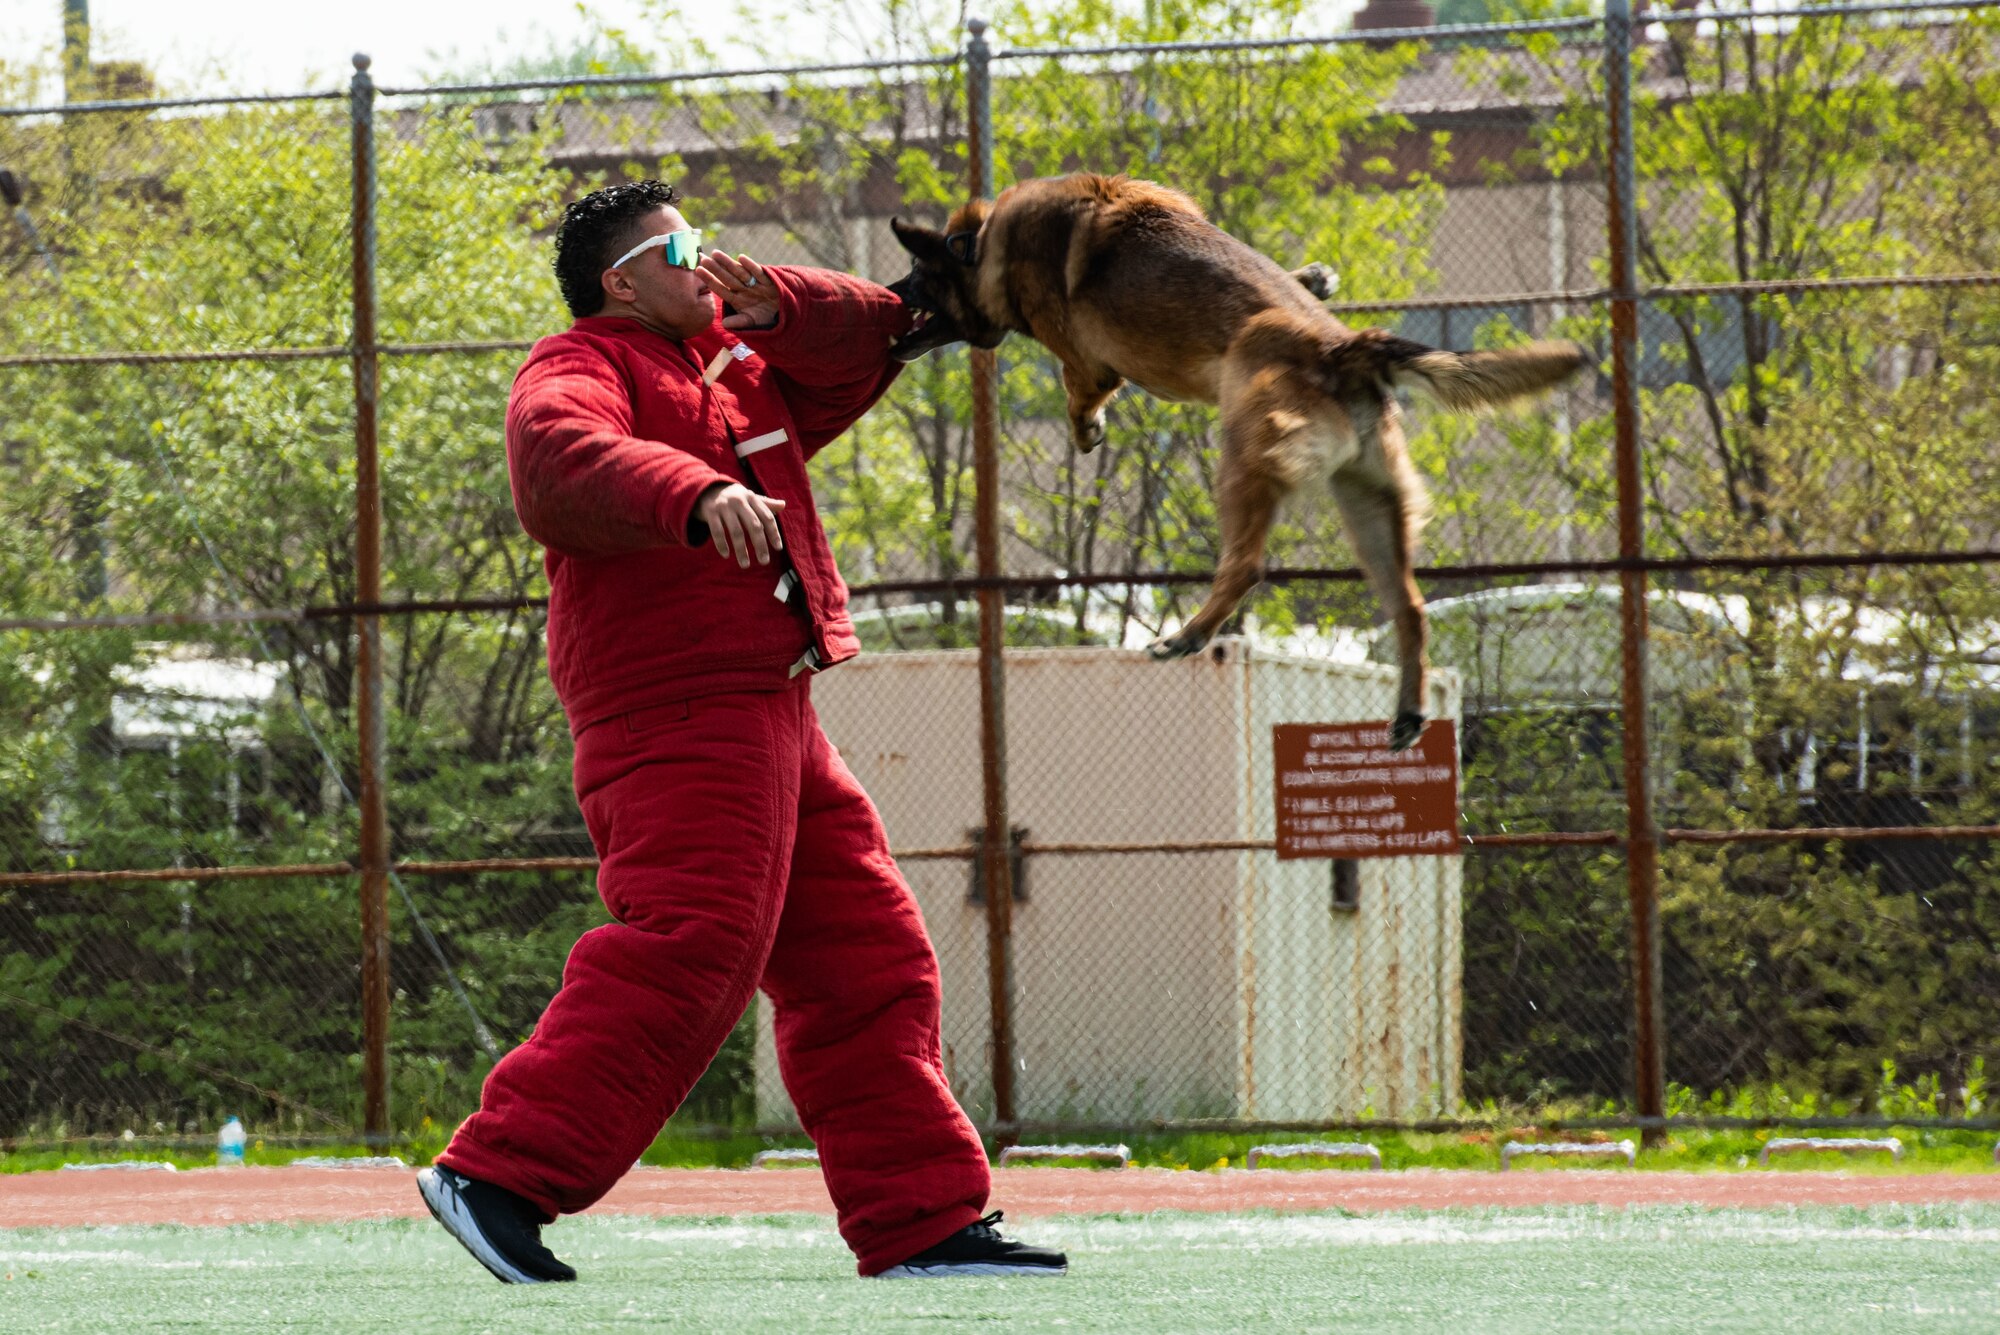 A military working dog trainer catches a military working dog during bite practice